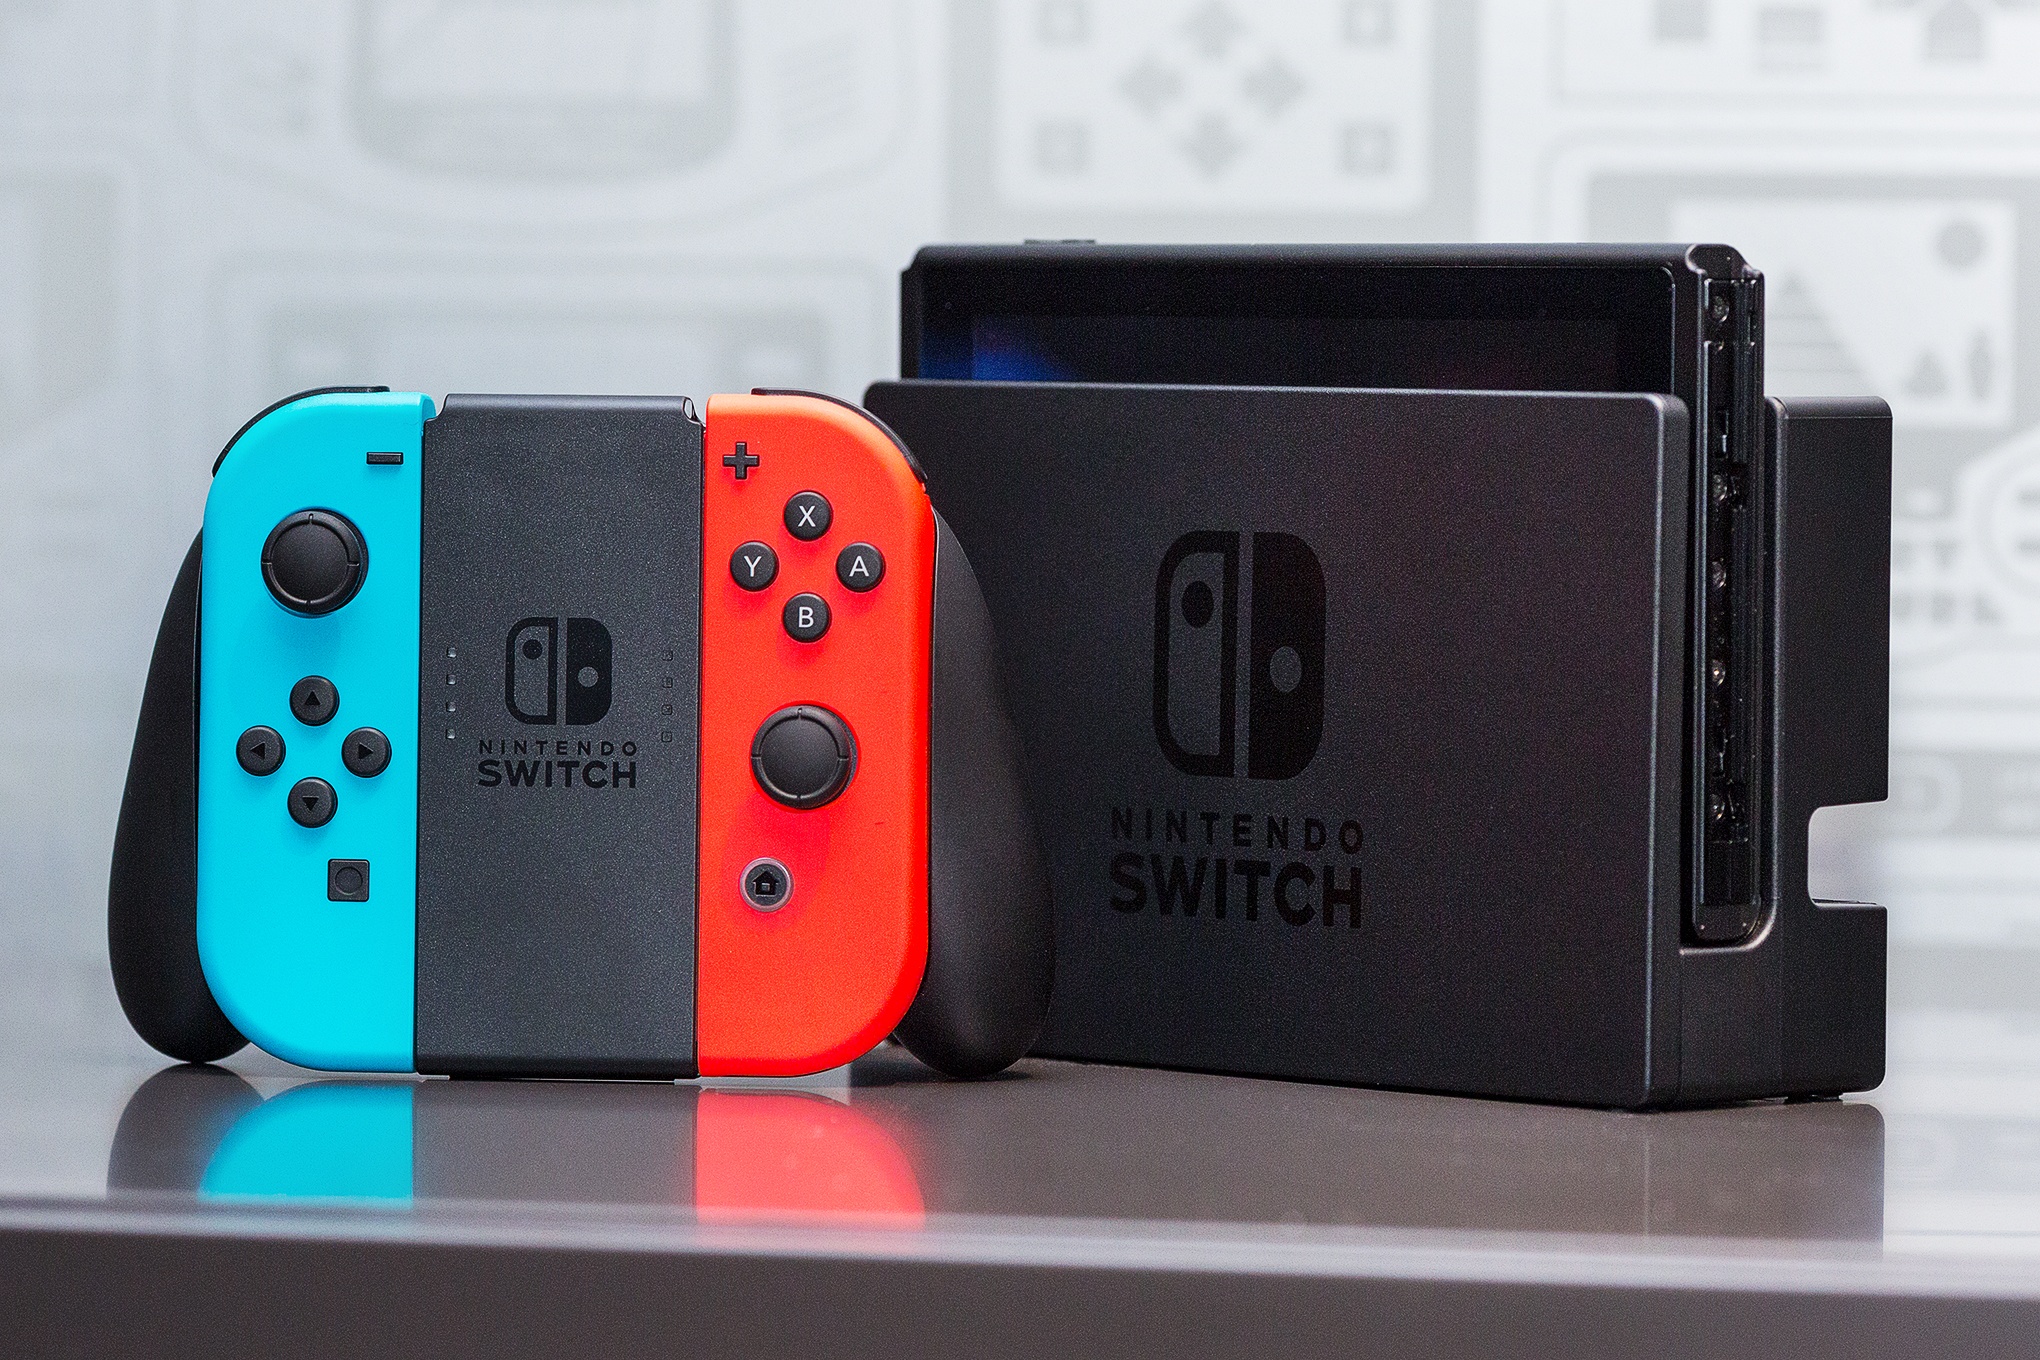 Nintendo boss says ‘no plans’ to unveil cheaper Switch at E3